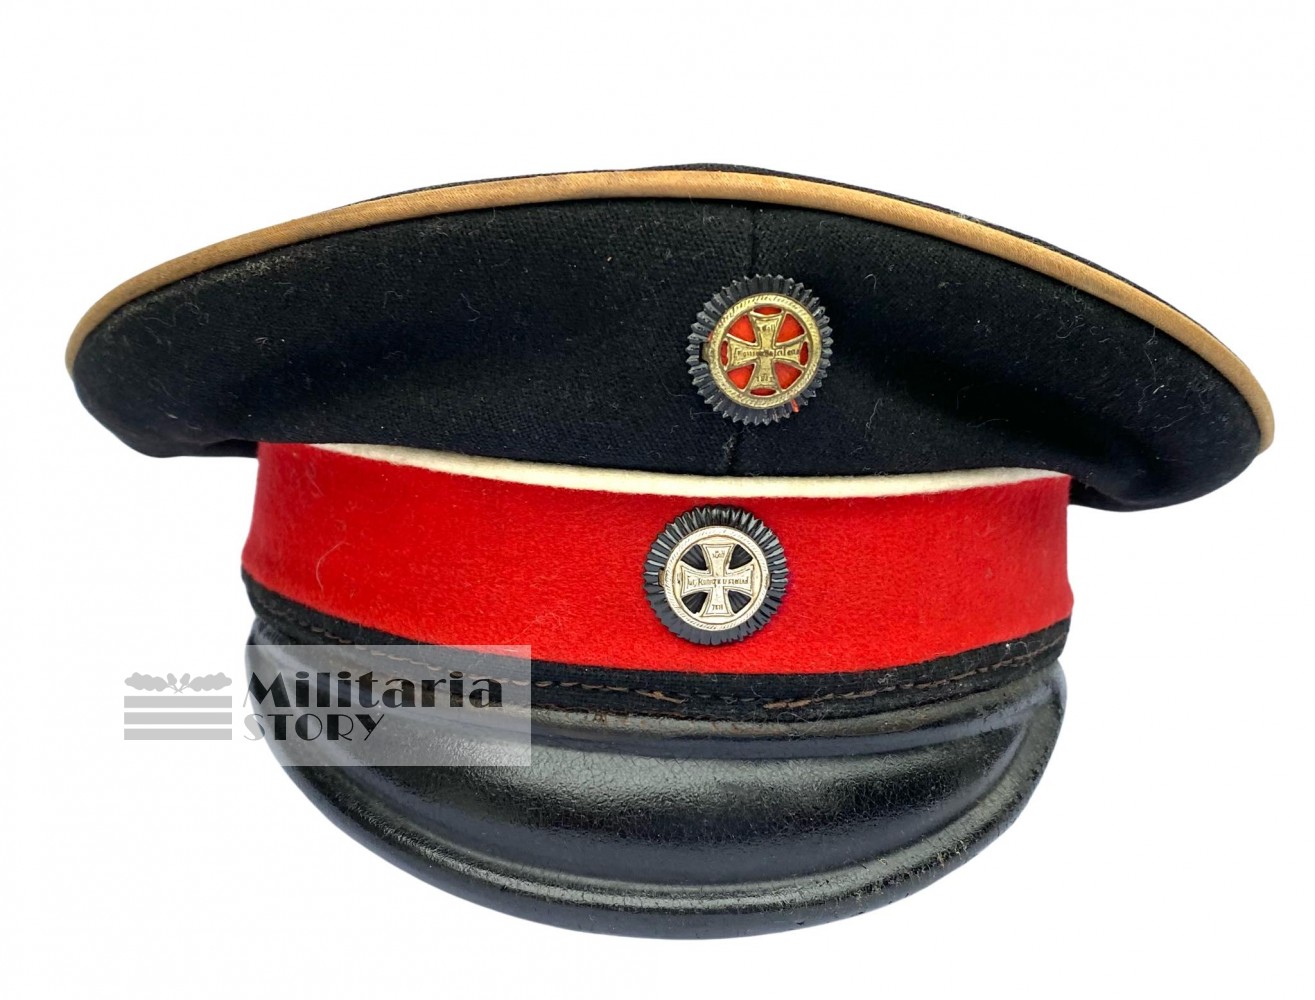 WWI Cap of the Prussian Landwehr - WWI Cap of the Prussian Landwehr: pre-war German Headgear